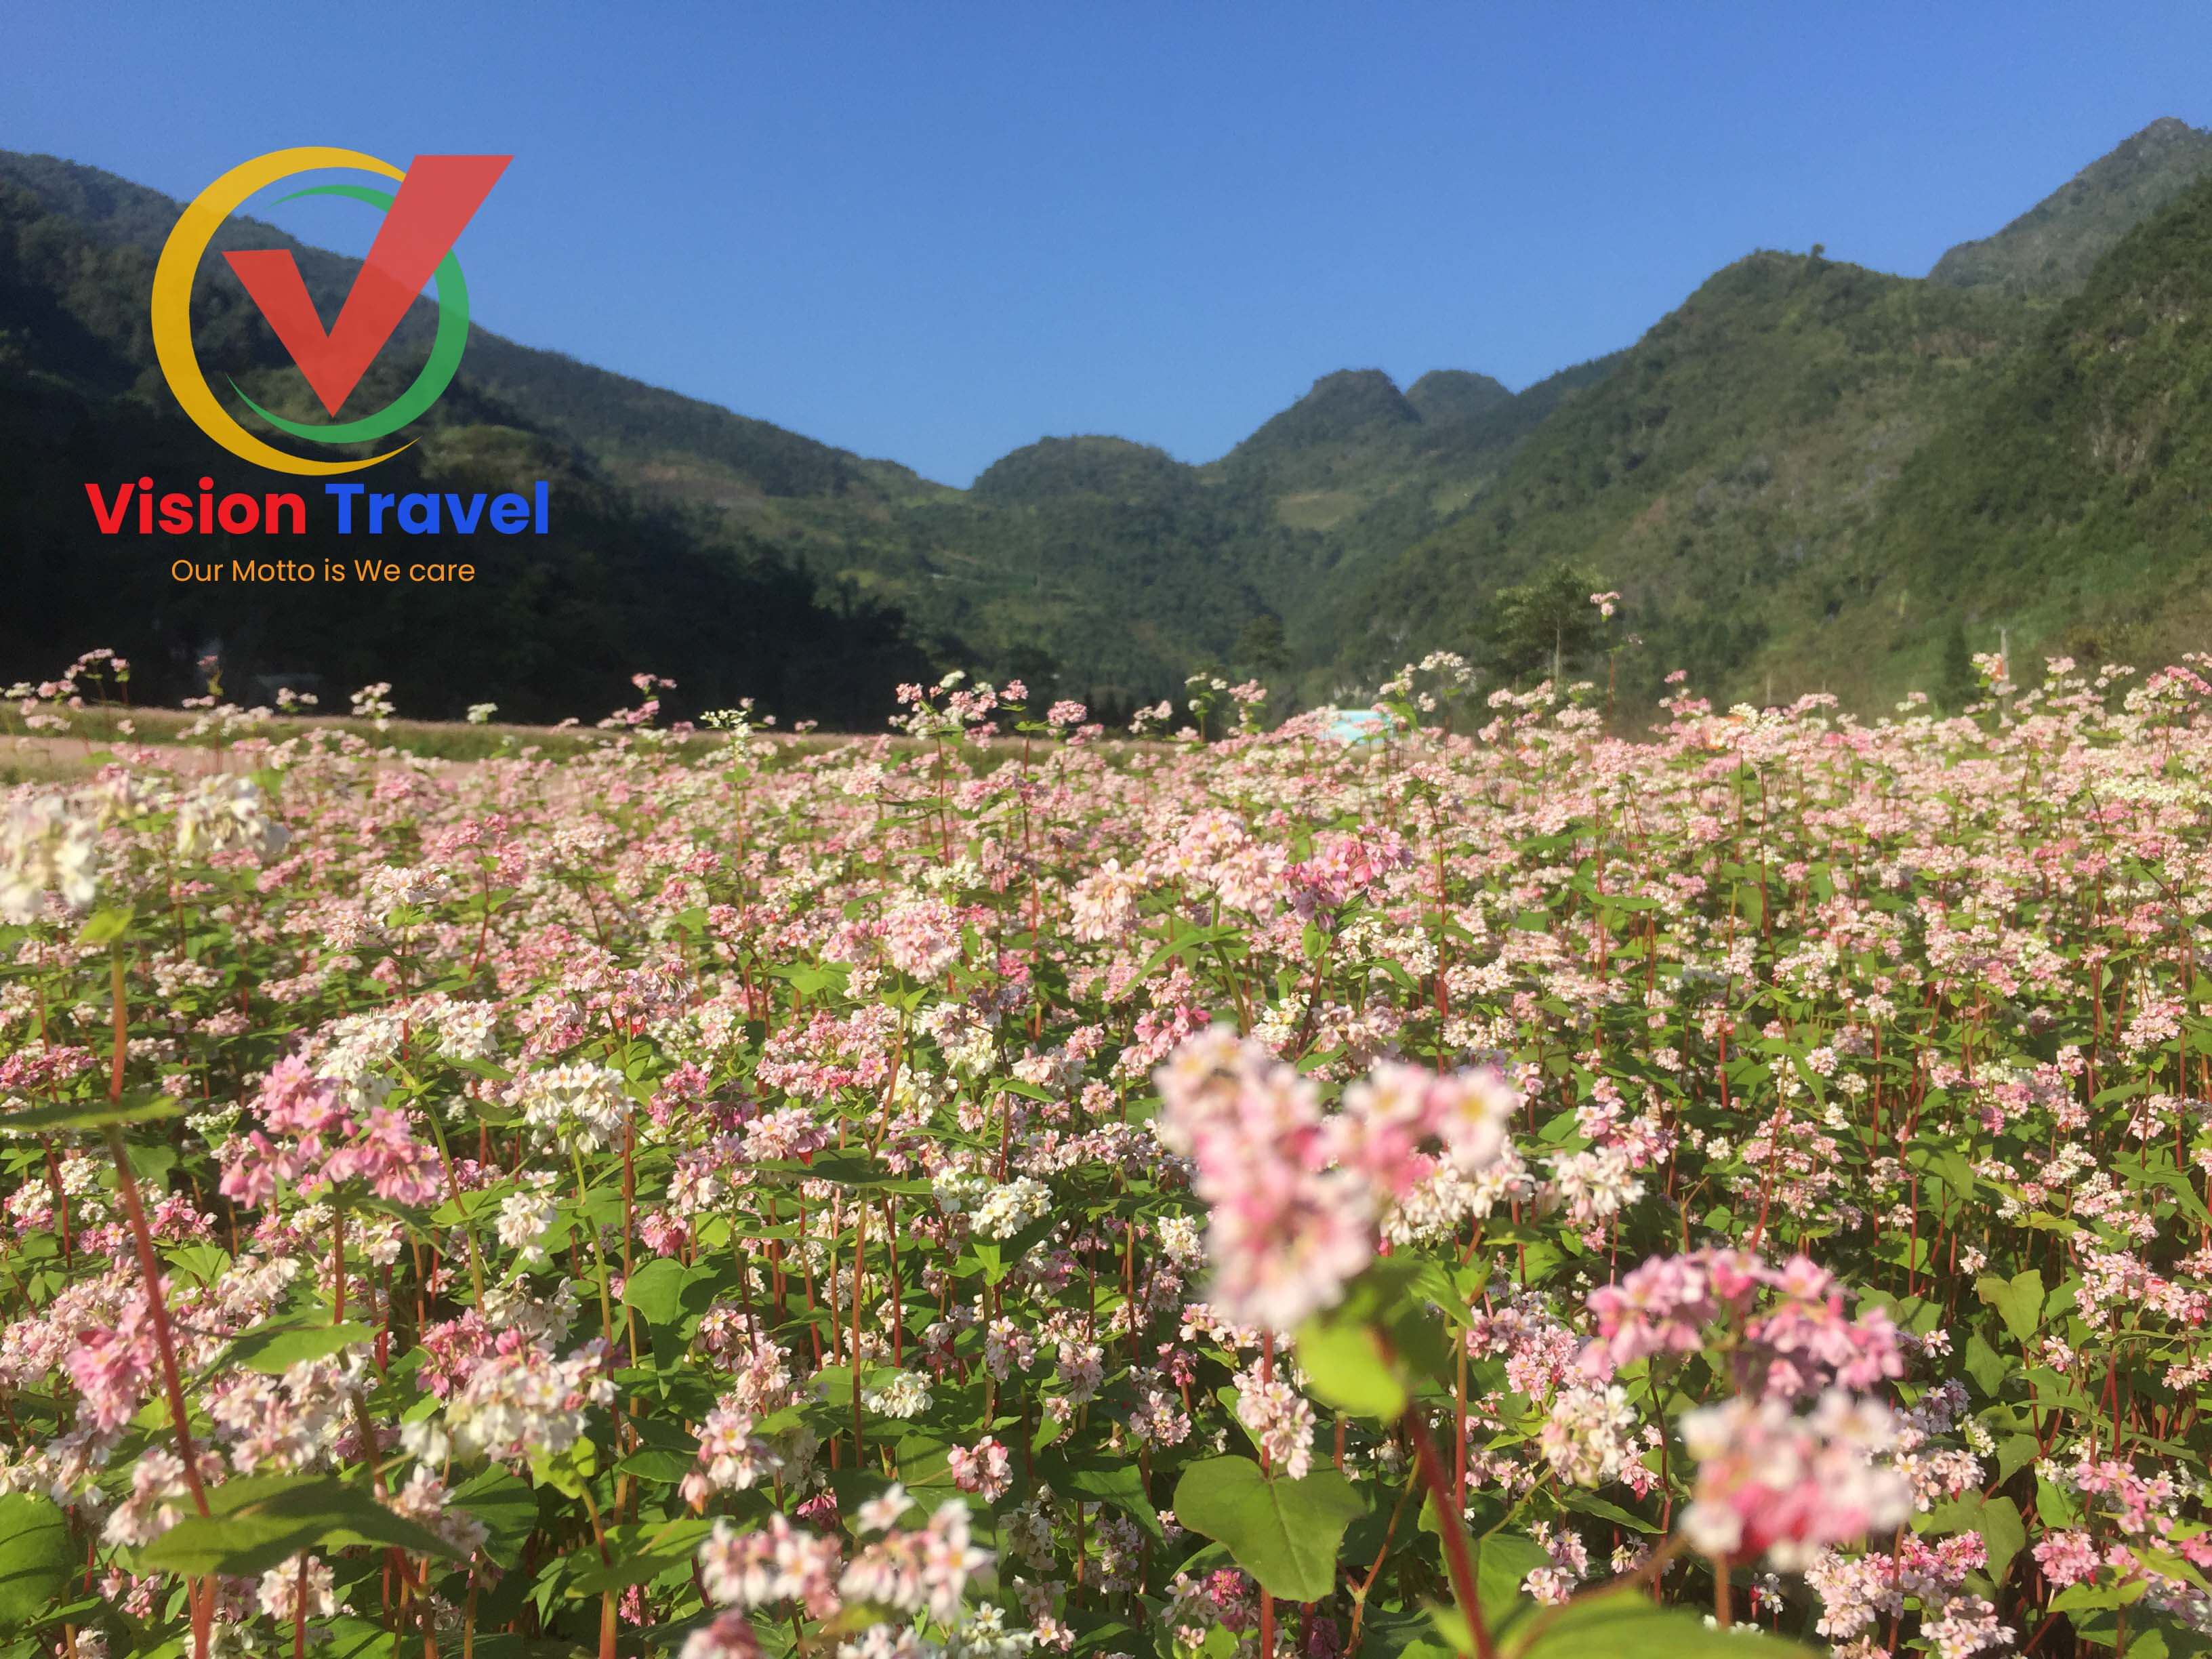 Nam Dam village - Lung Cu village6-day by vehicle Captivating Ha Giang tour (Home stay, Trekking, Market)